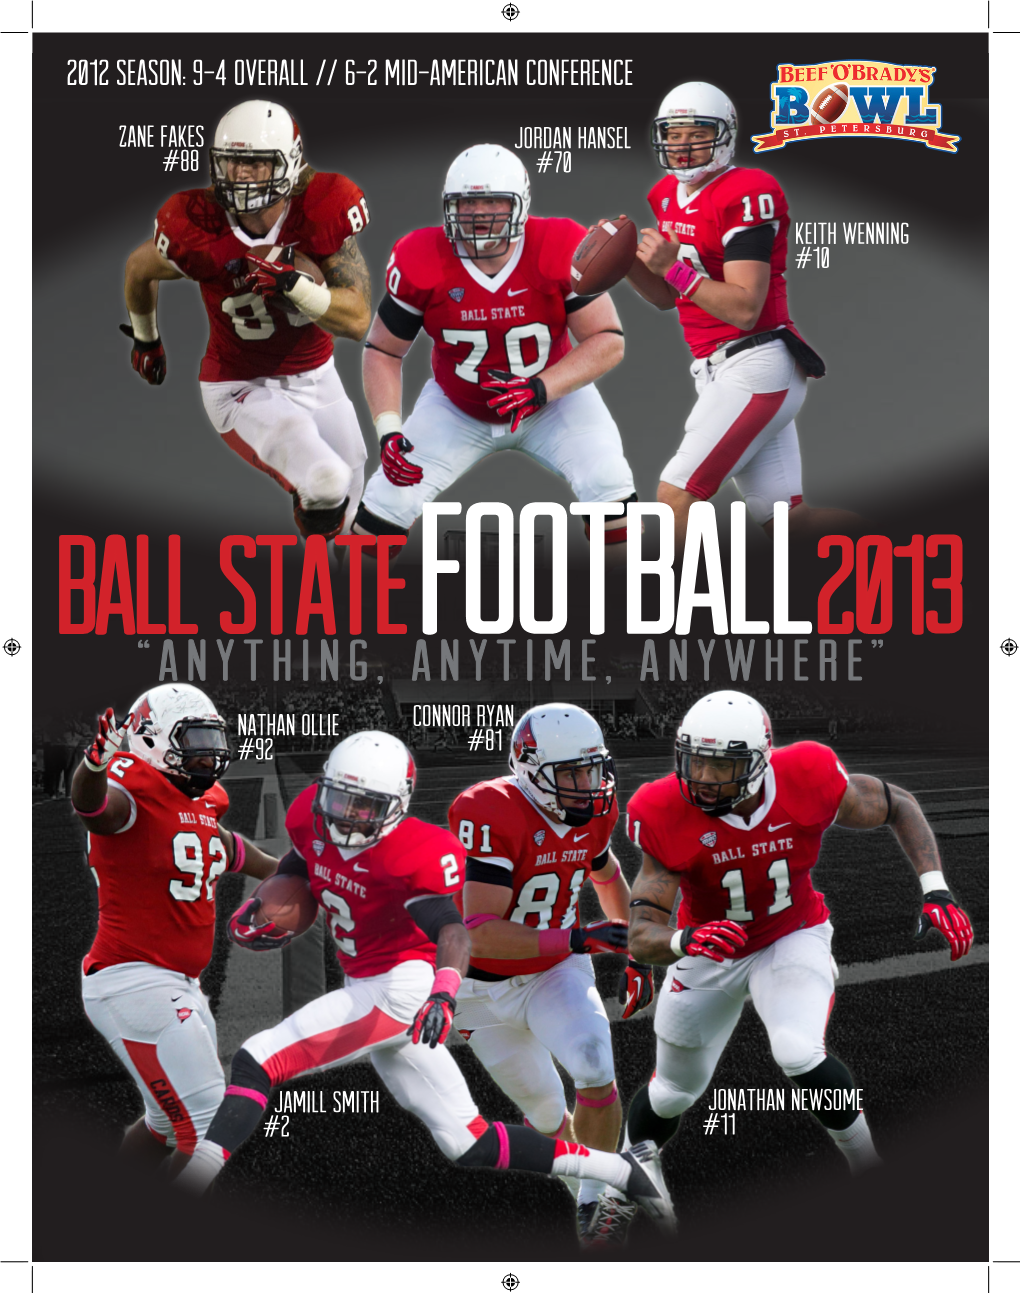 Keith Wenning #10 Ball State Football 2013 “ANYTHING, ANYTIME, Anywhere” Nathan Ollie Connor Ryan #92 #81